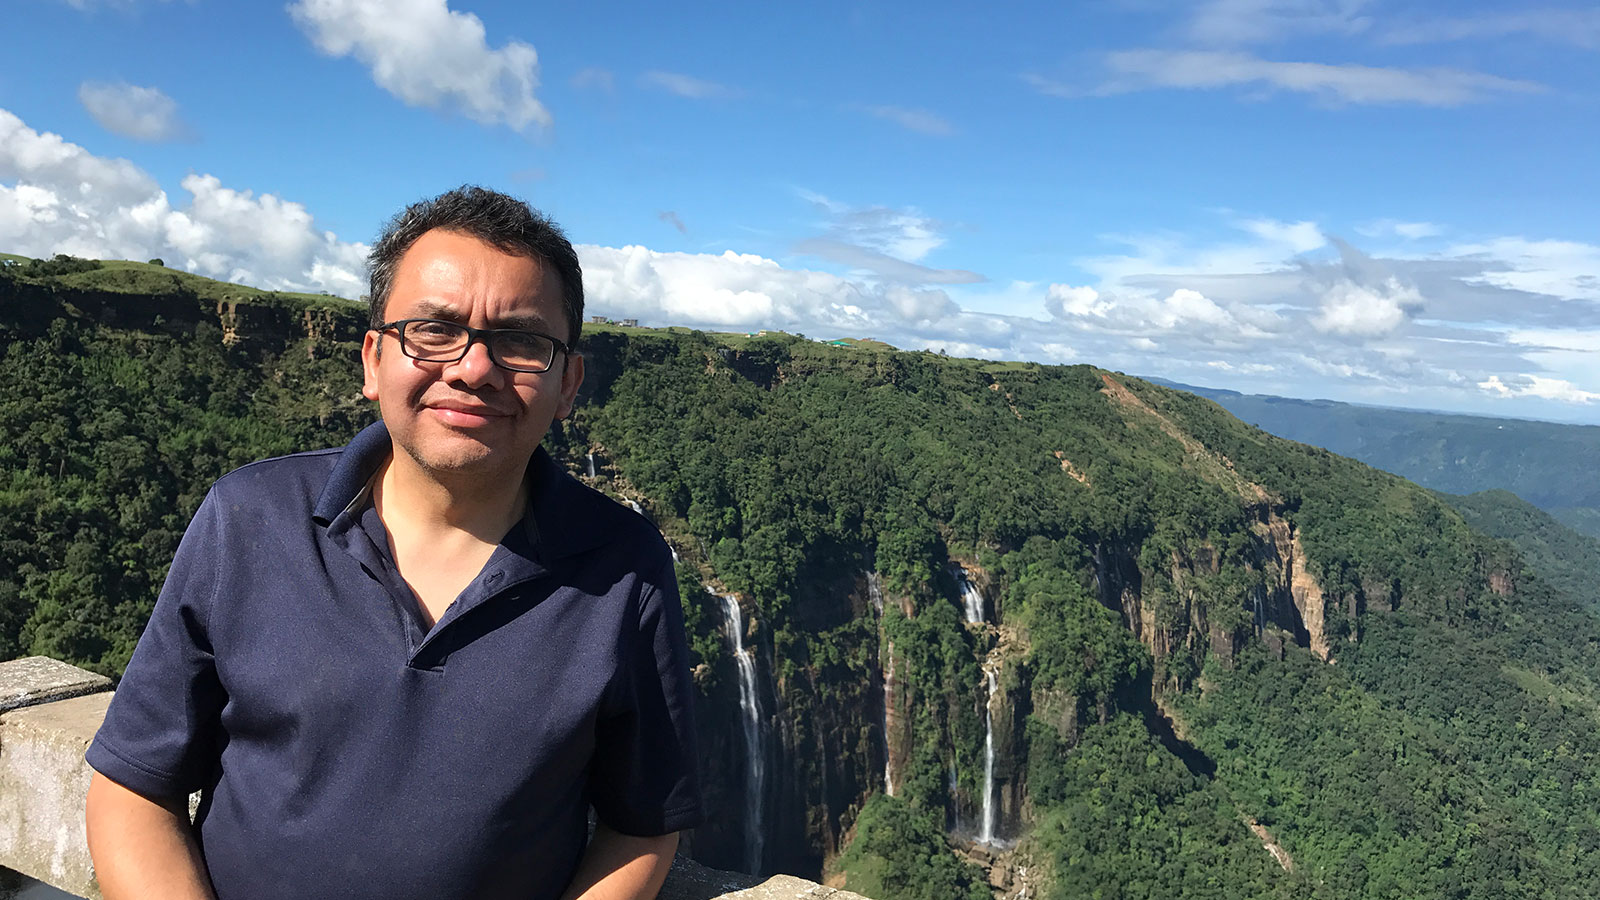 Dr. Francisco-Munoz-Arriola standing in front of a picturesque scene of mountains, forests and waterfalls.